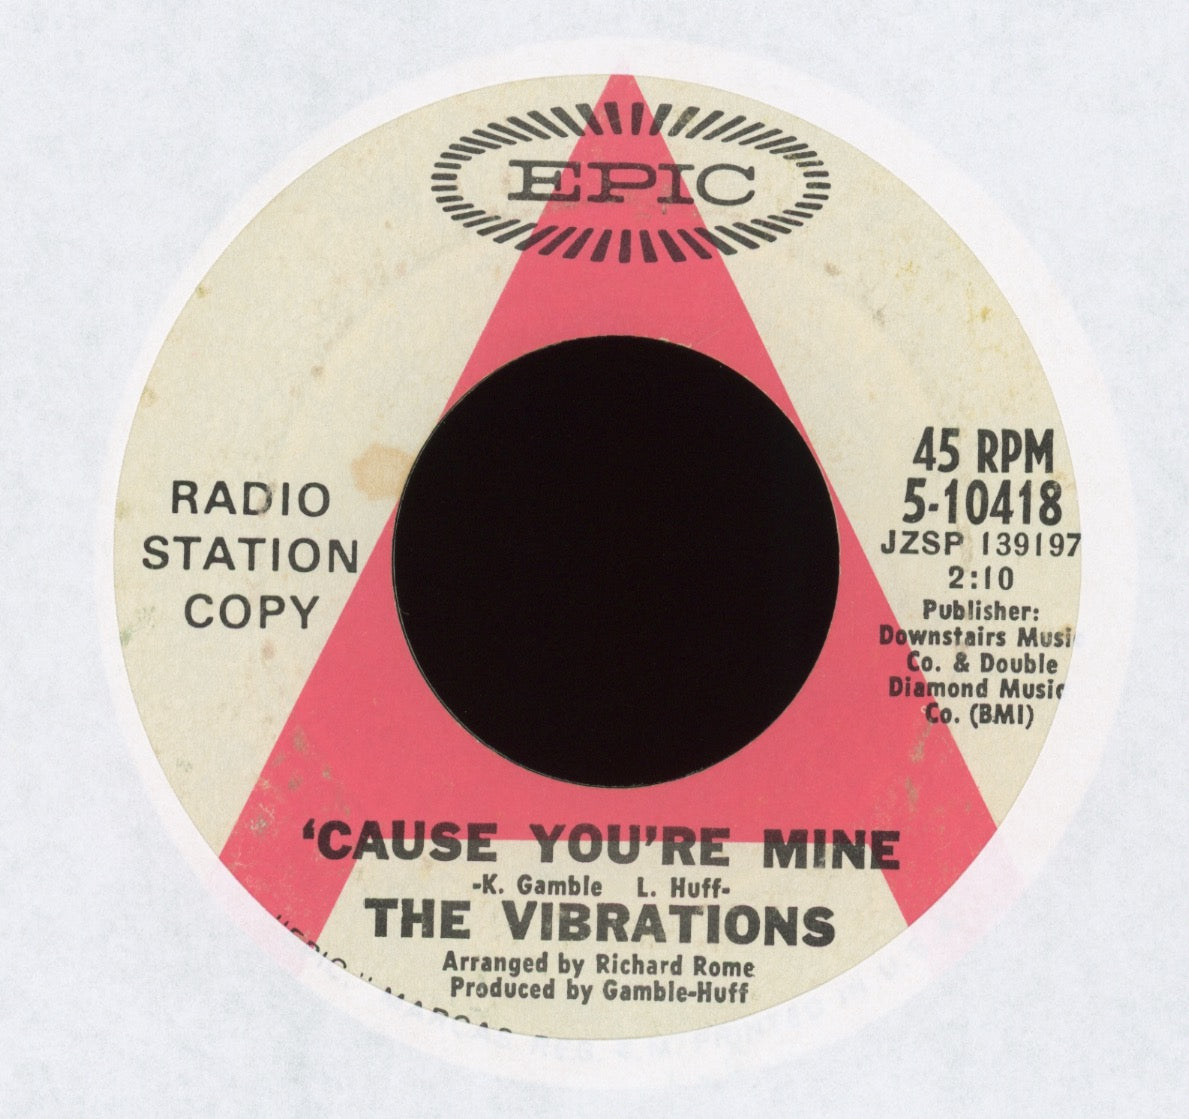 The Vibrations - 'Cause You're Mine / I Took An Overdose on Epic Promo